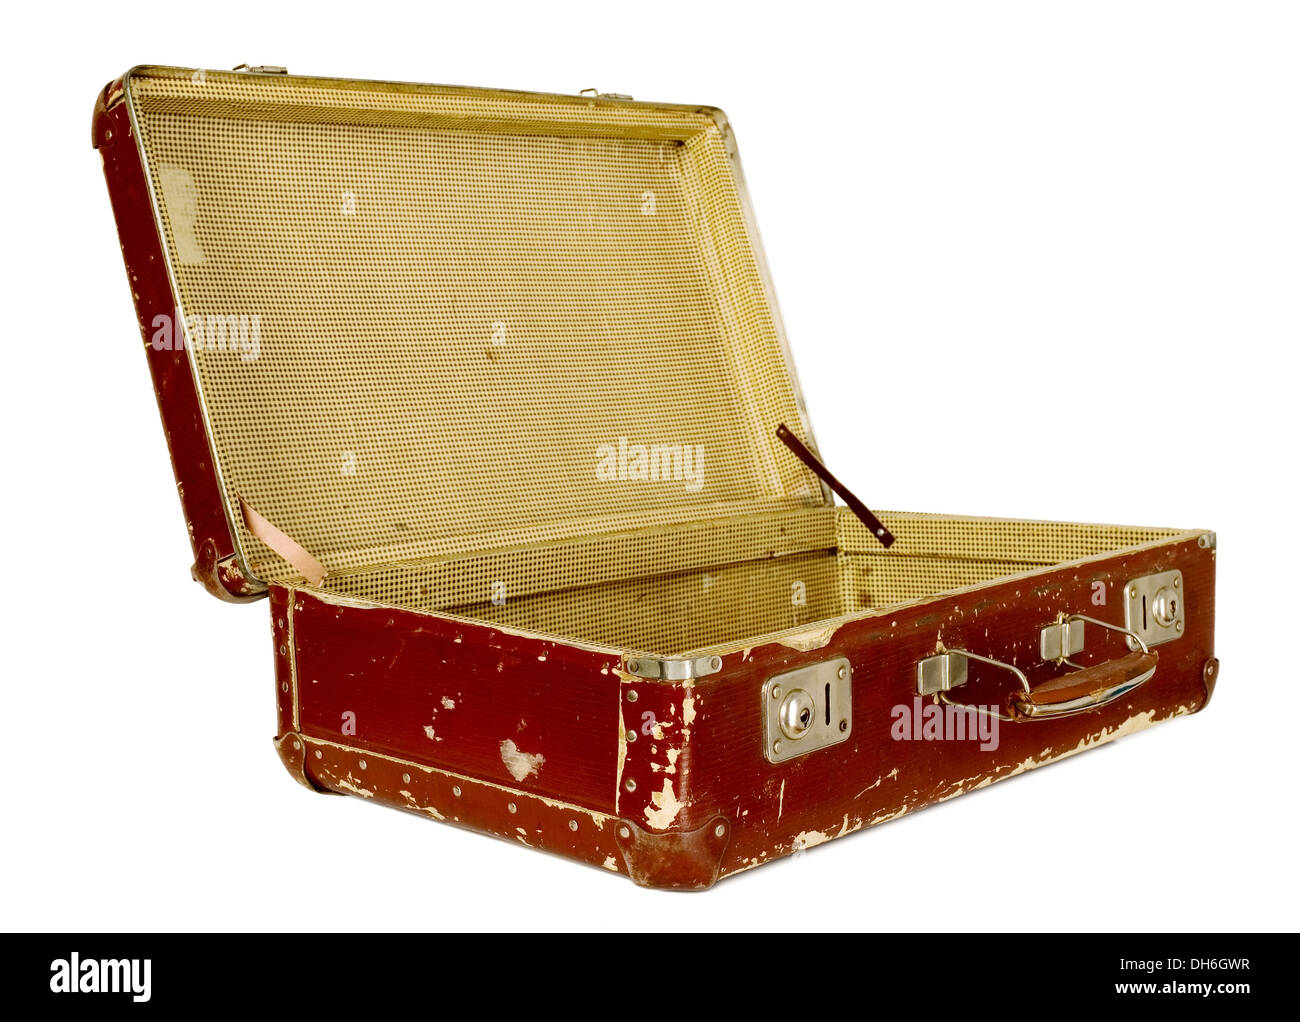 Vintage old brown suitcase on white isolated background Stock Photo